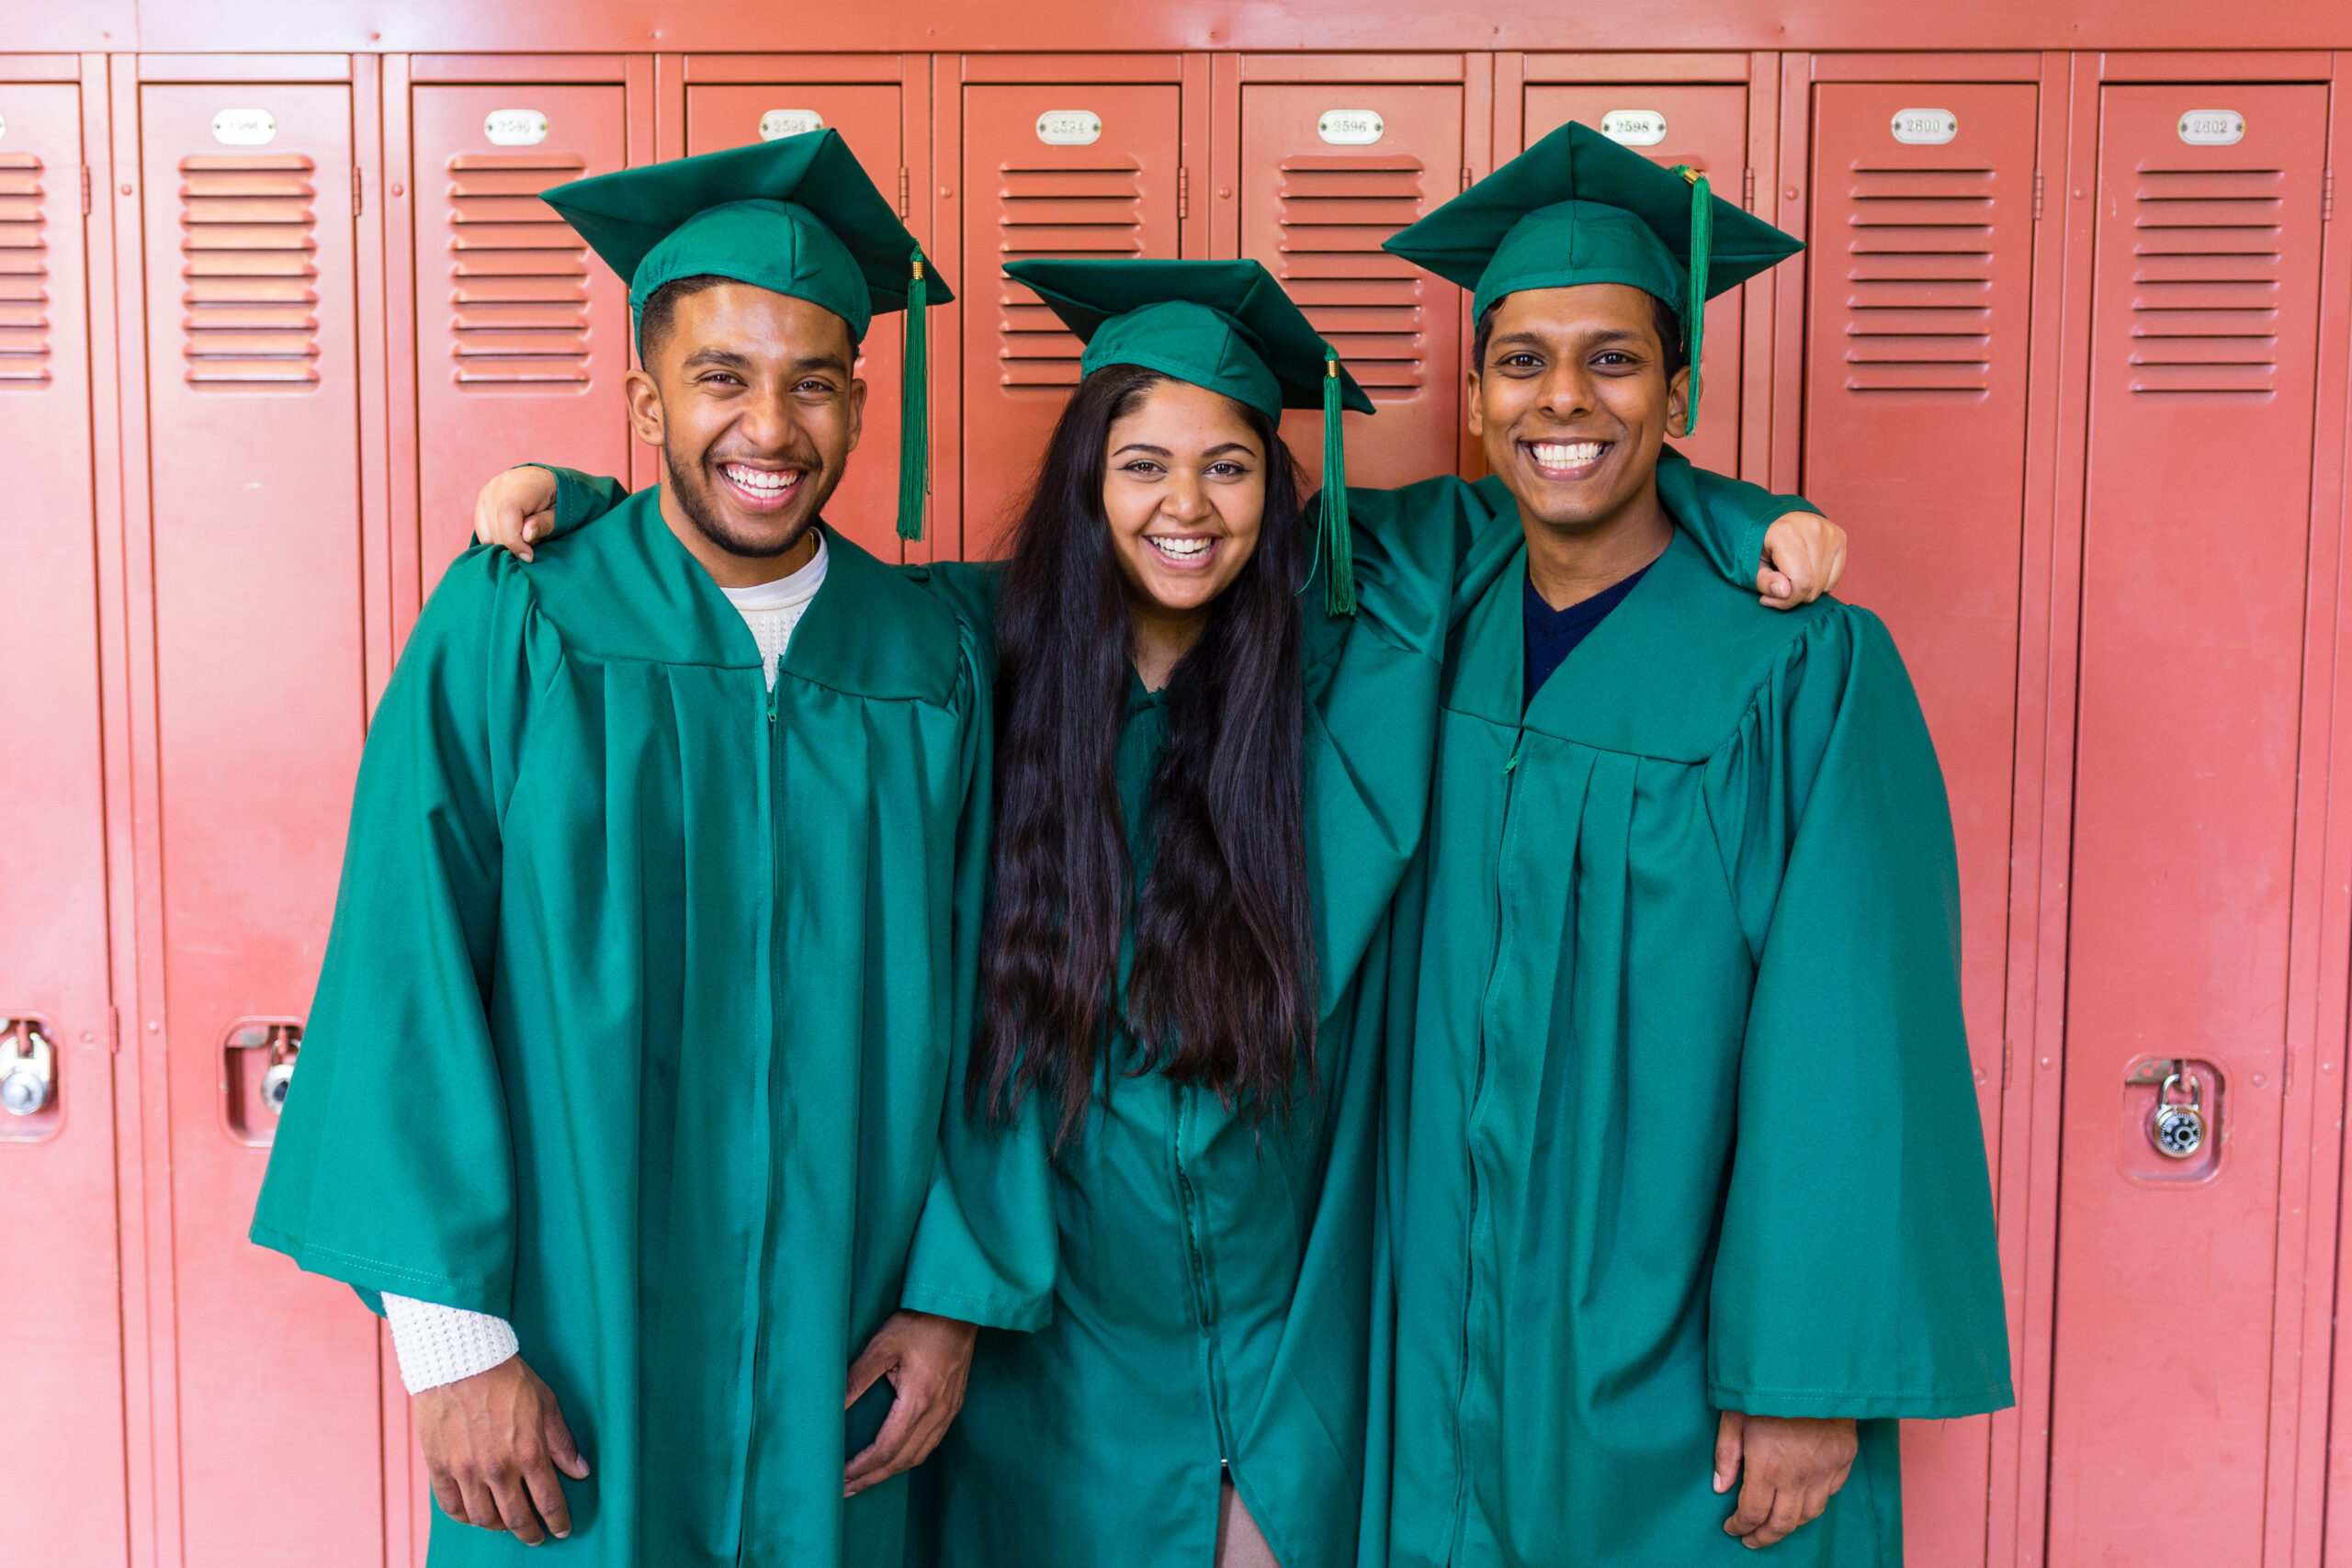 Three graduates stand together in front of orange school lockers. They are wearing dark green caps and gowns.